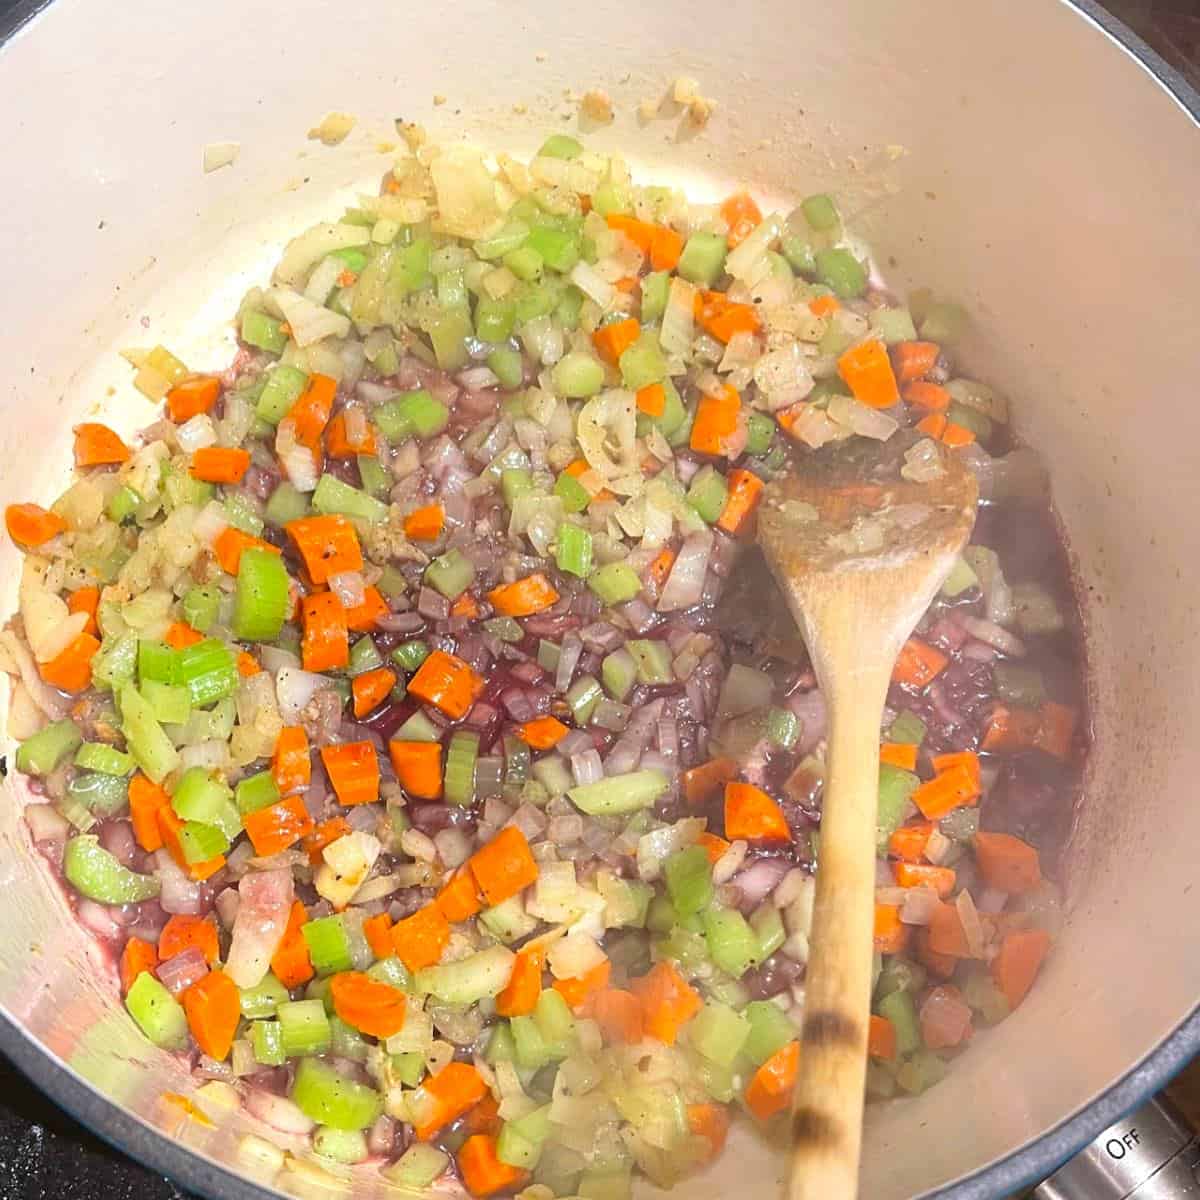 Garlic and vegetables added to Dutch oven with spoon.